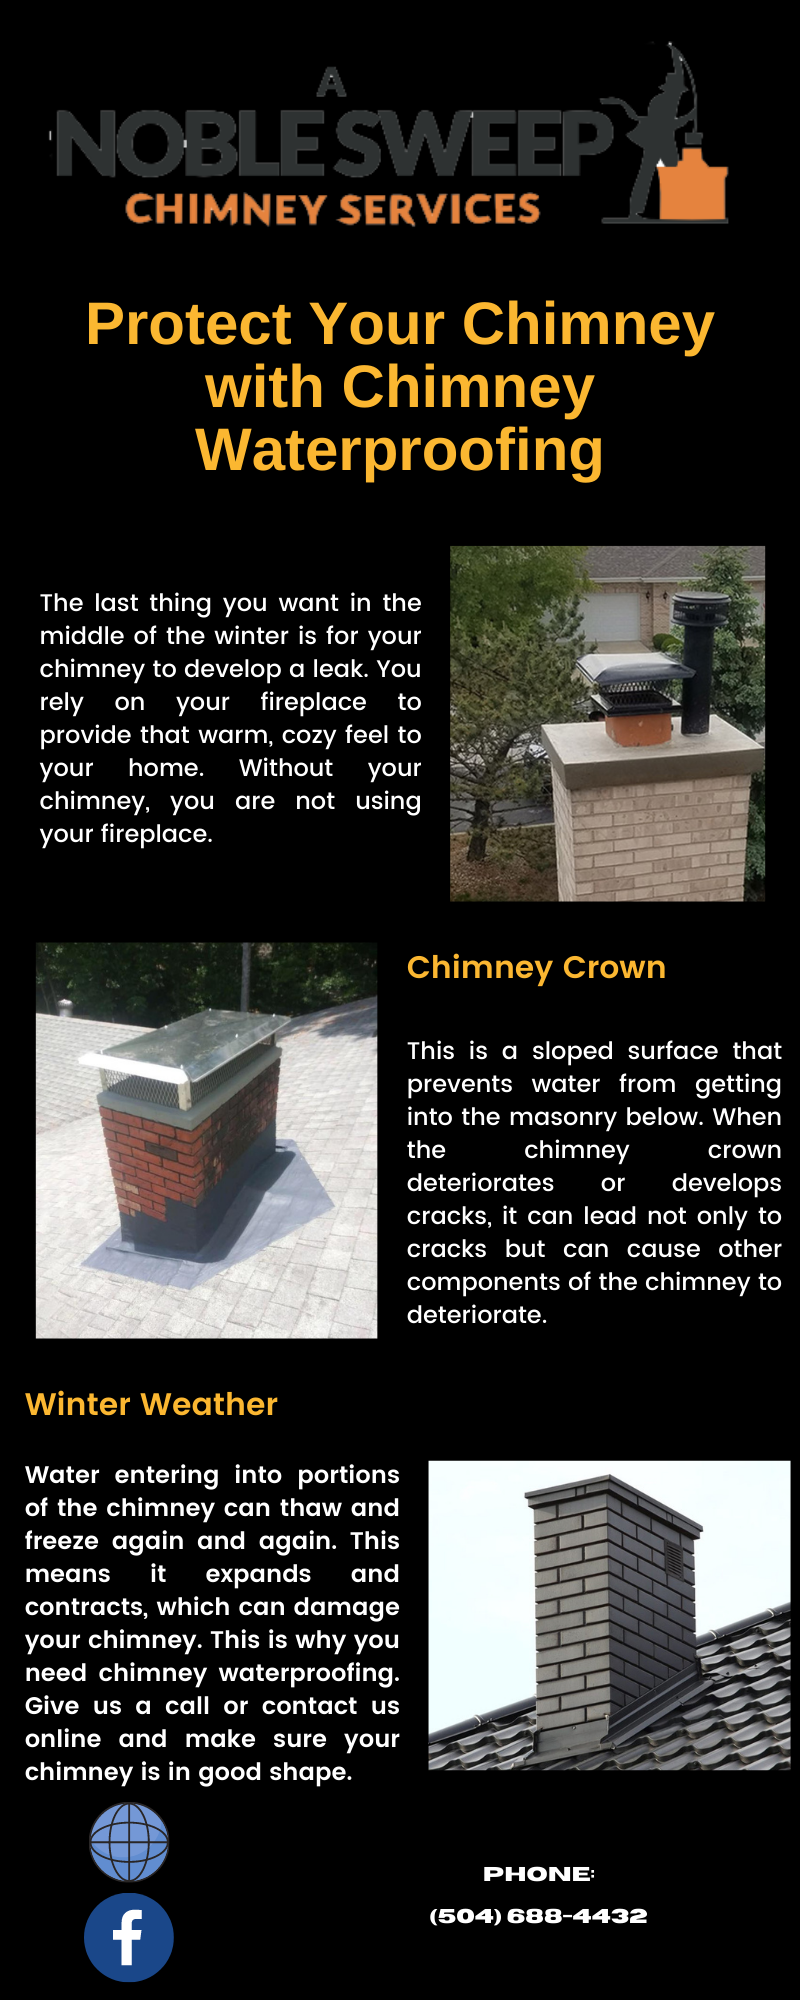 Protect Your Chimney With Chimney waterproofing - Gifyu